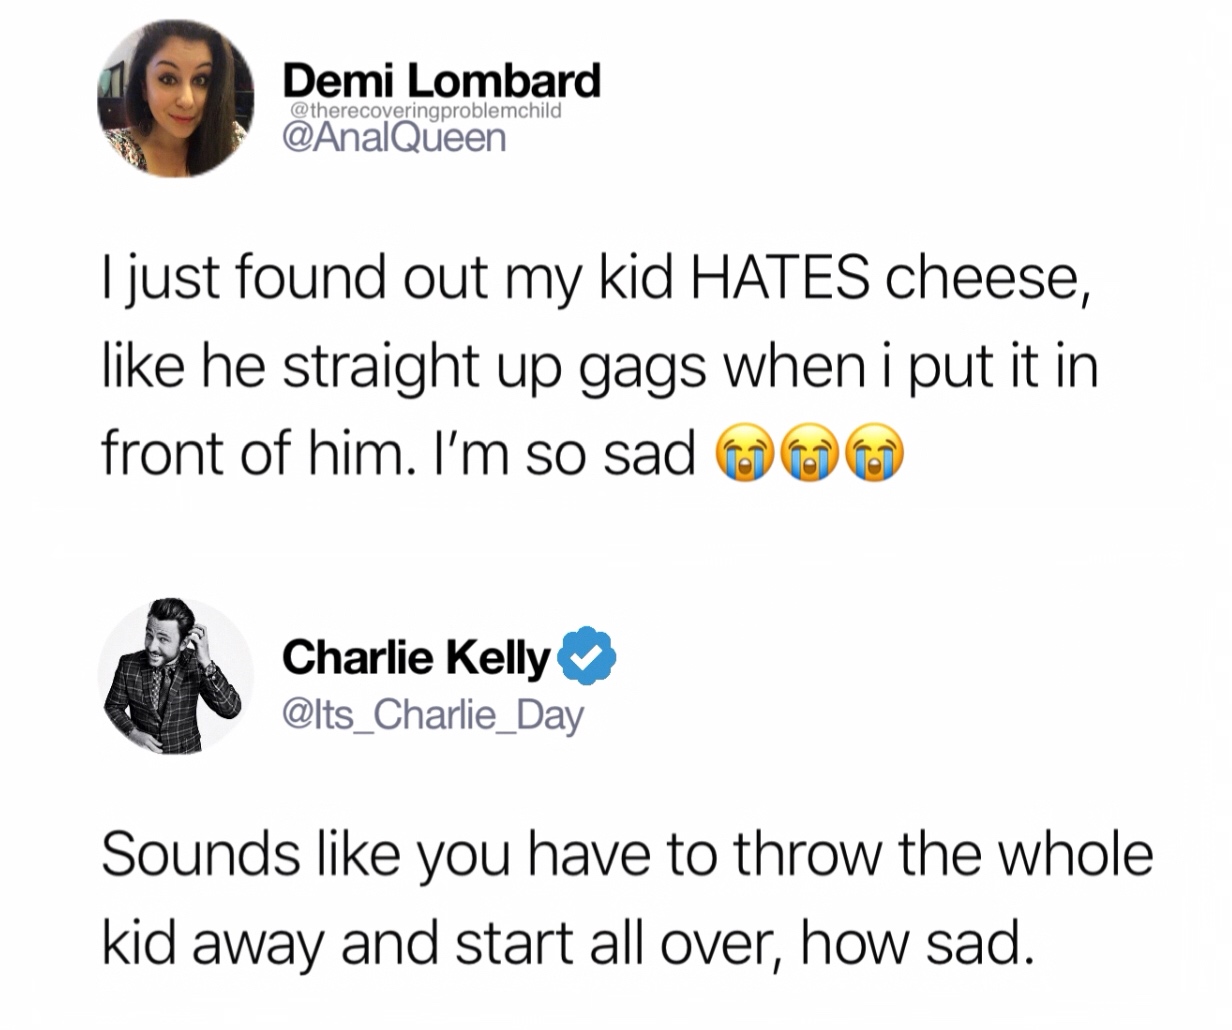 organization - Demi Lombard I just found out my kid Hates cheese, he straight up gags when i put it in front of him. I'm so sad Charlie Kelly Sounds you have to throw the whole kid away and start all over, how sad.